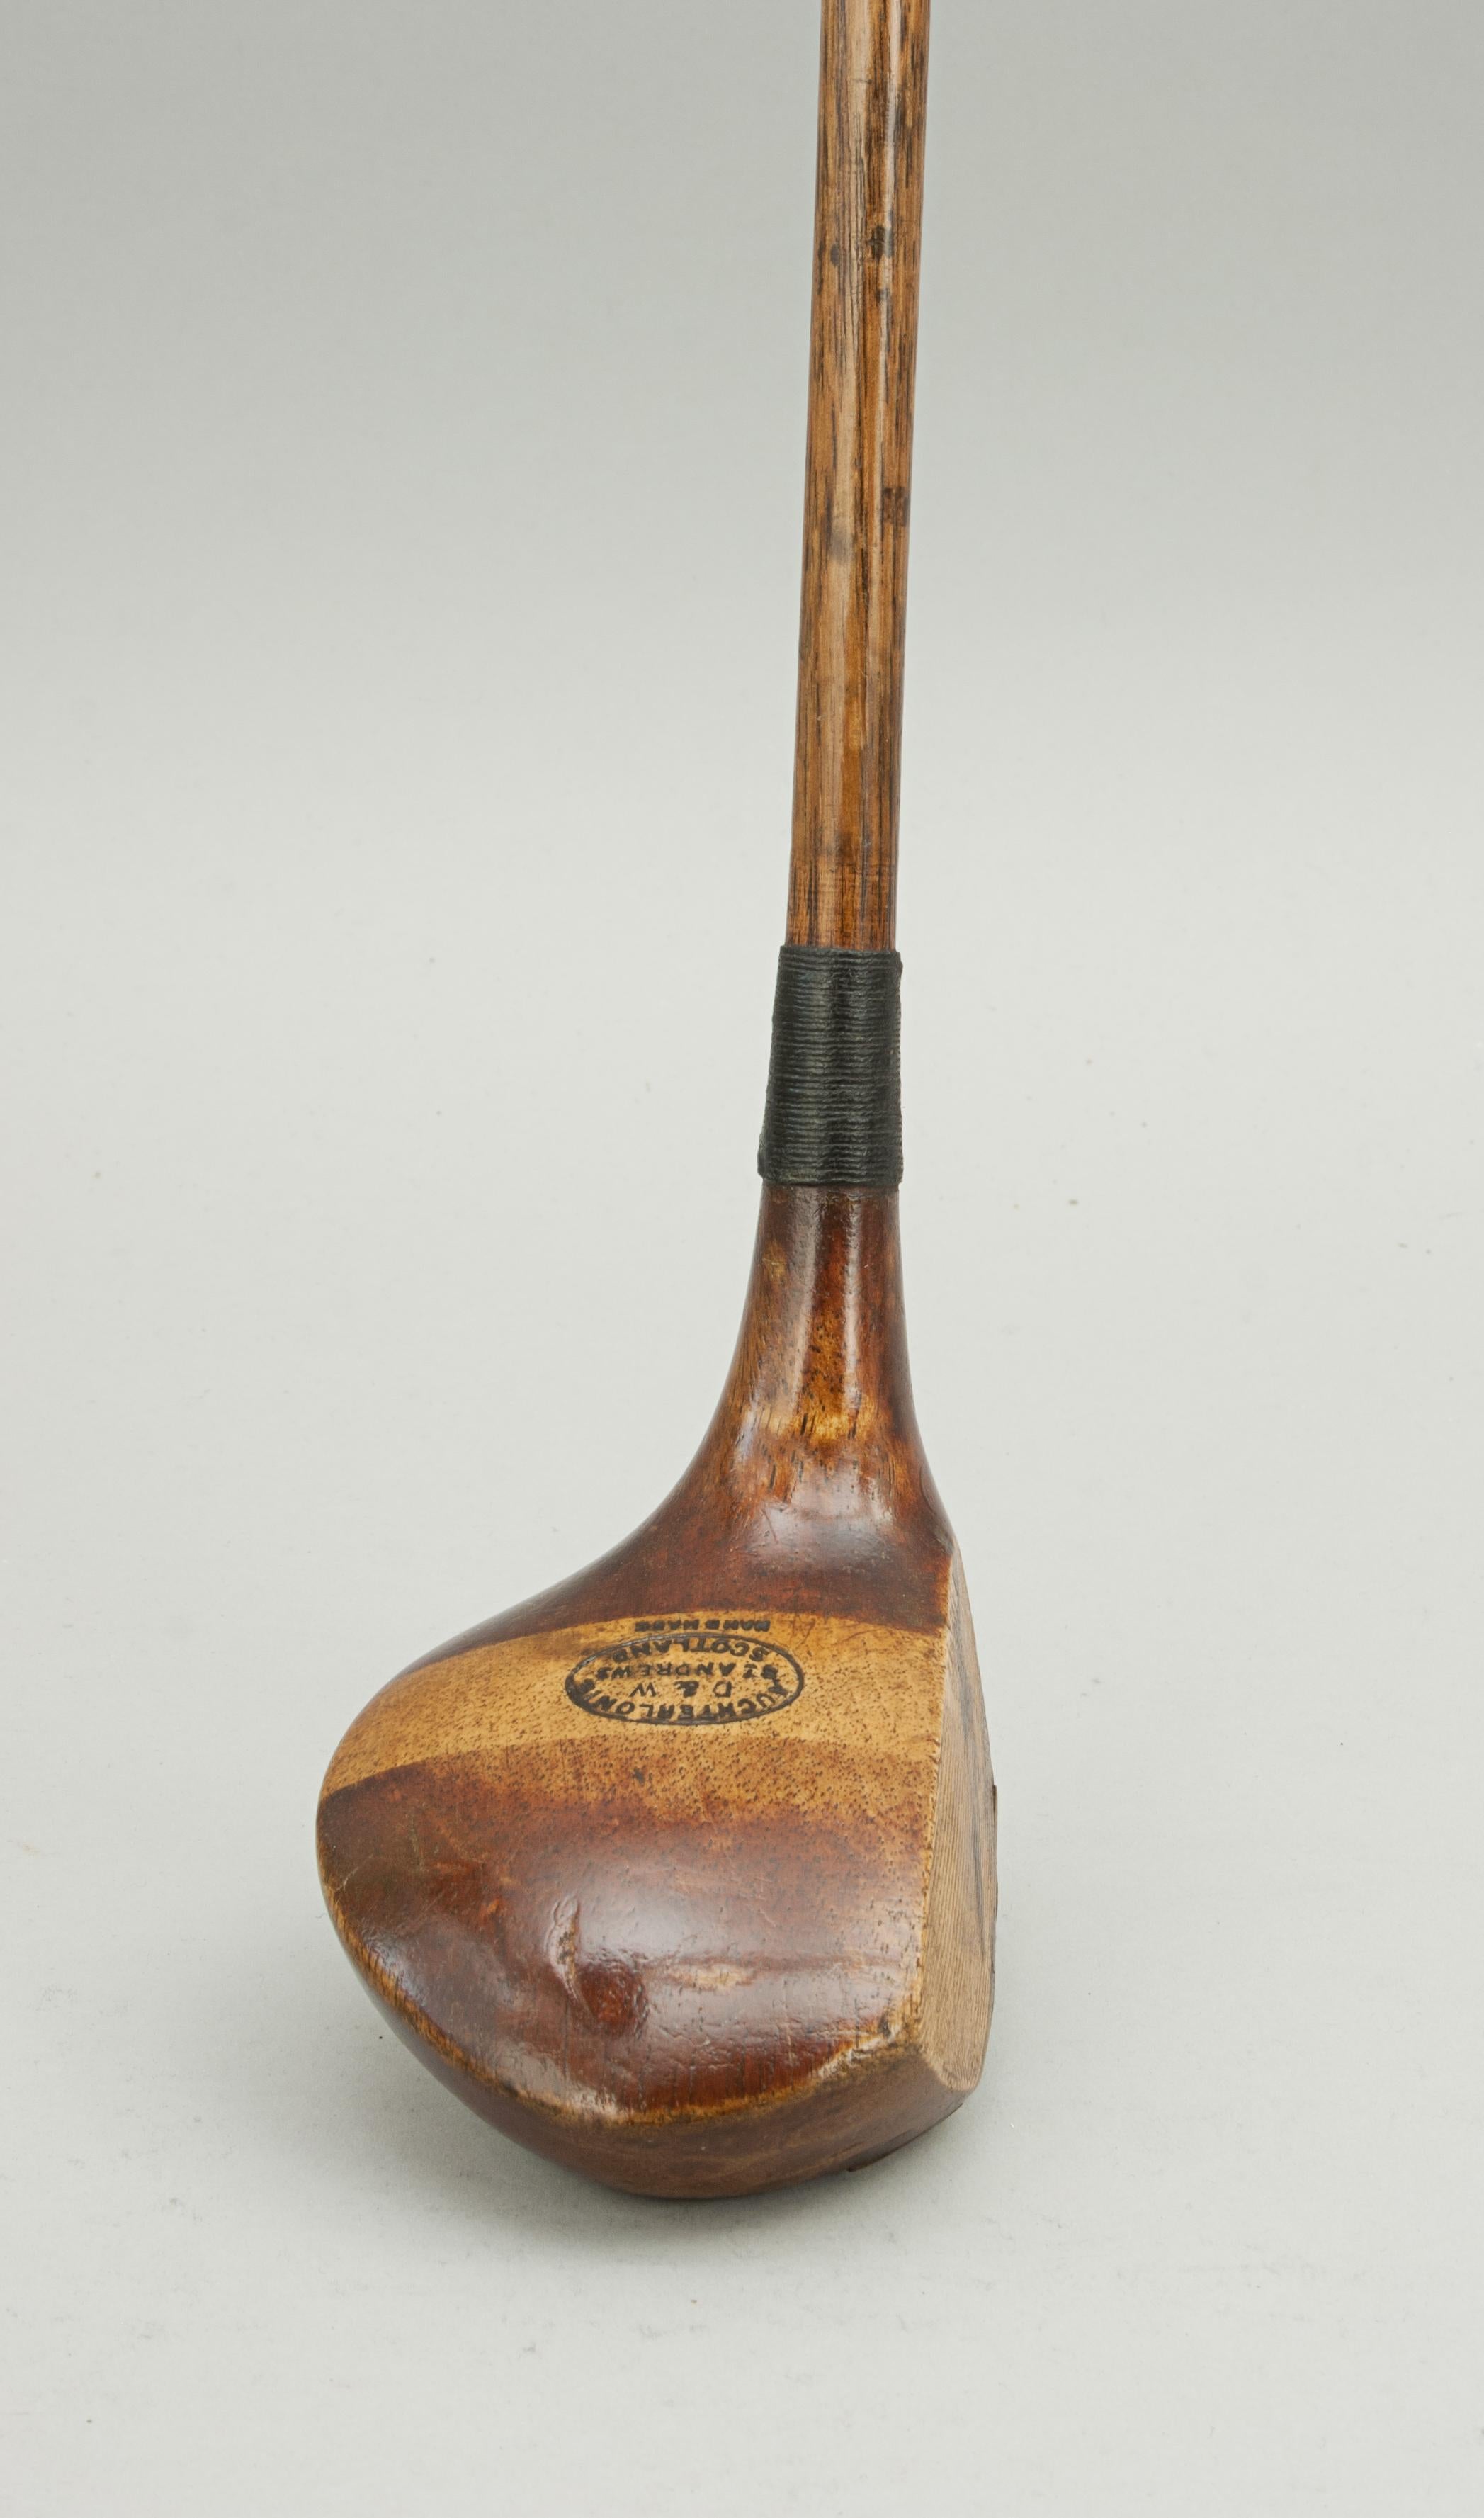 Scottish Vintage Golf Club, Hickory Shafted by Auchterlonie, St Andrews